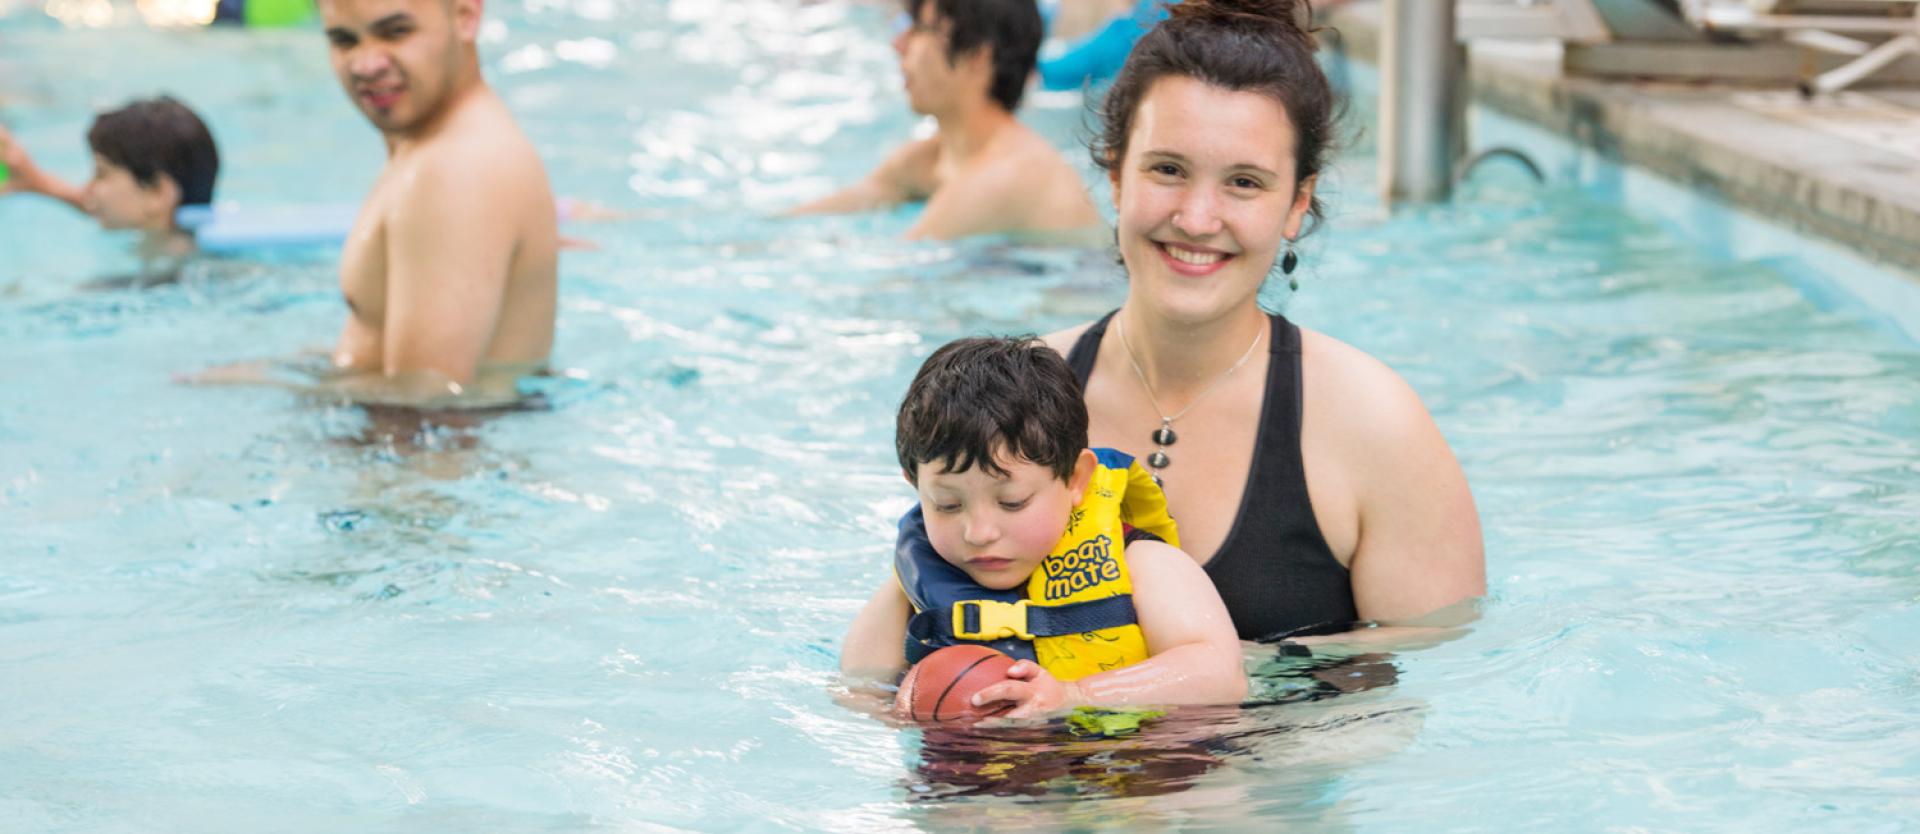 people in a pool and one woman holding a child